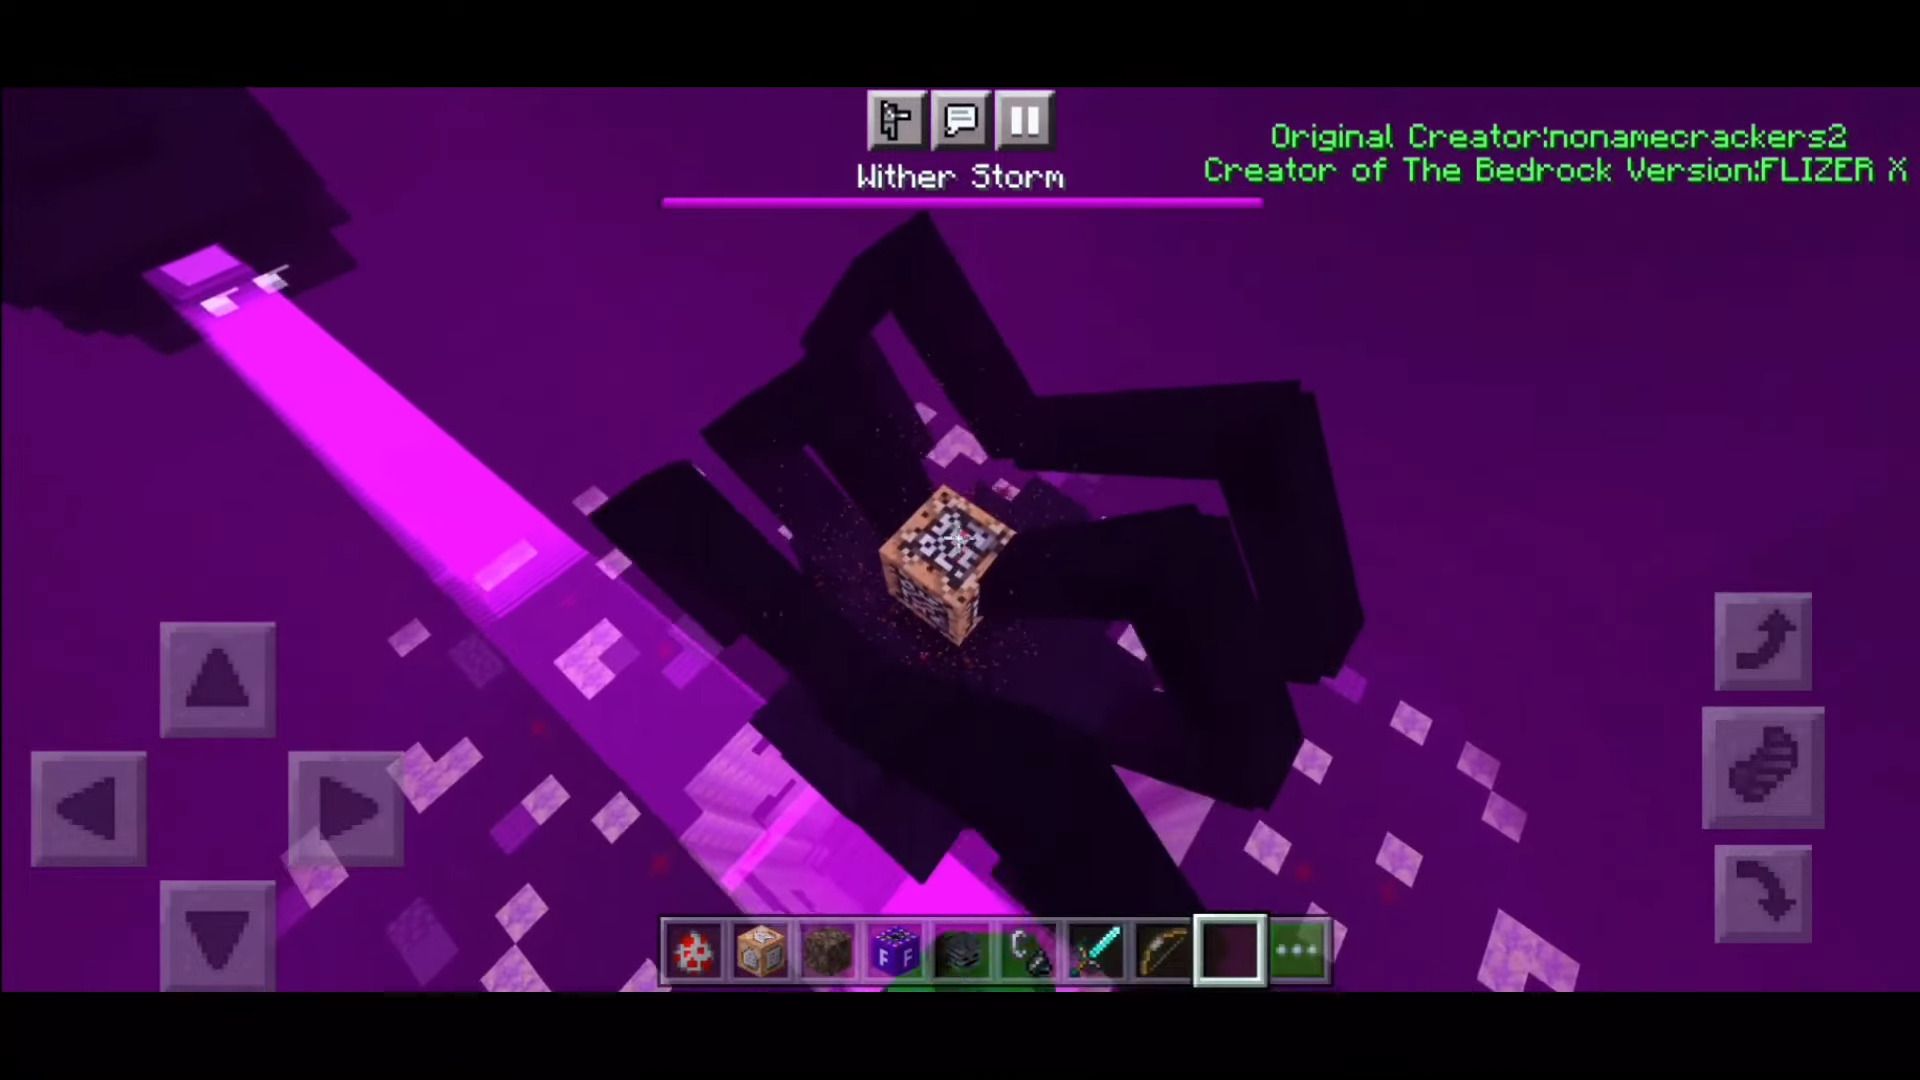 Crackers Wither Storm - Minecraft Mod - Download